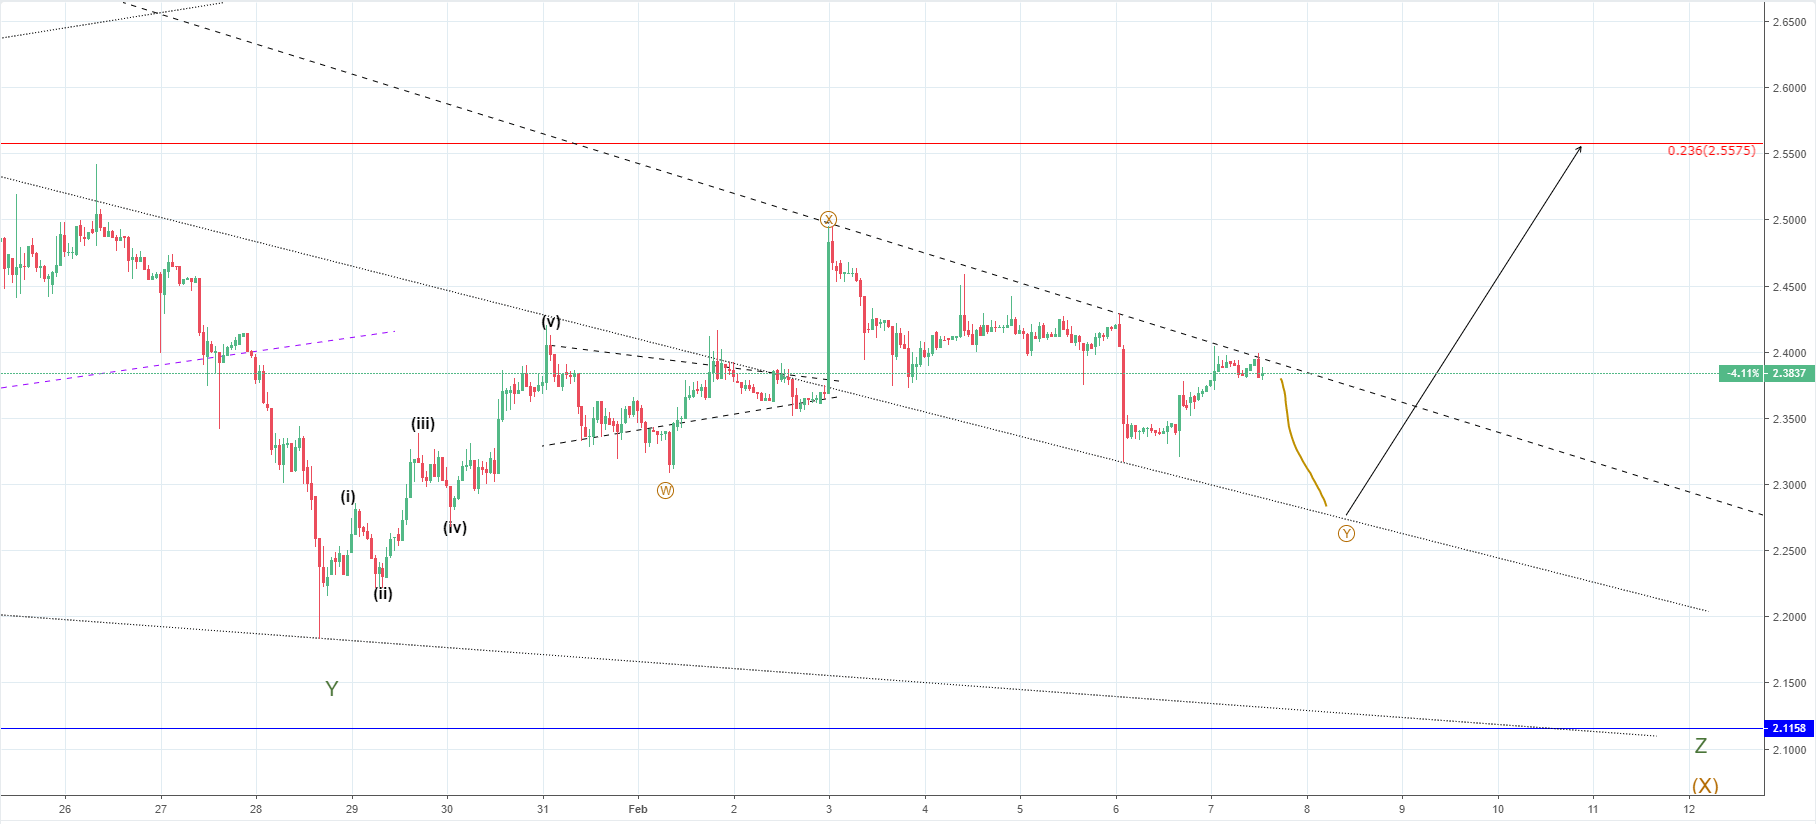 LTC/USD gained some upward traction, EOS/USD in a downtrend